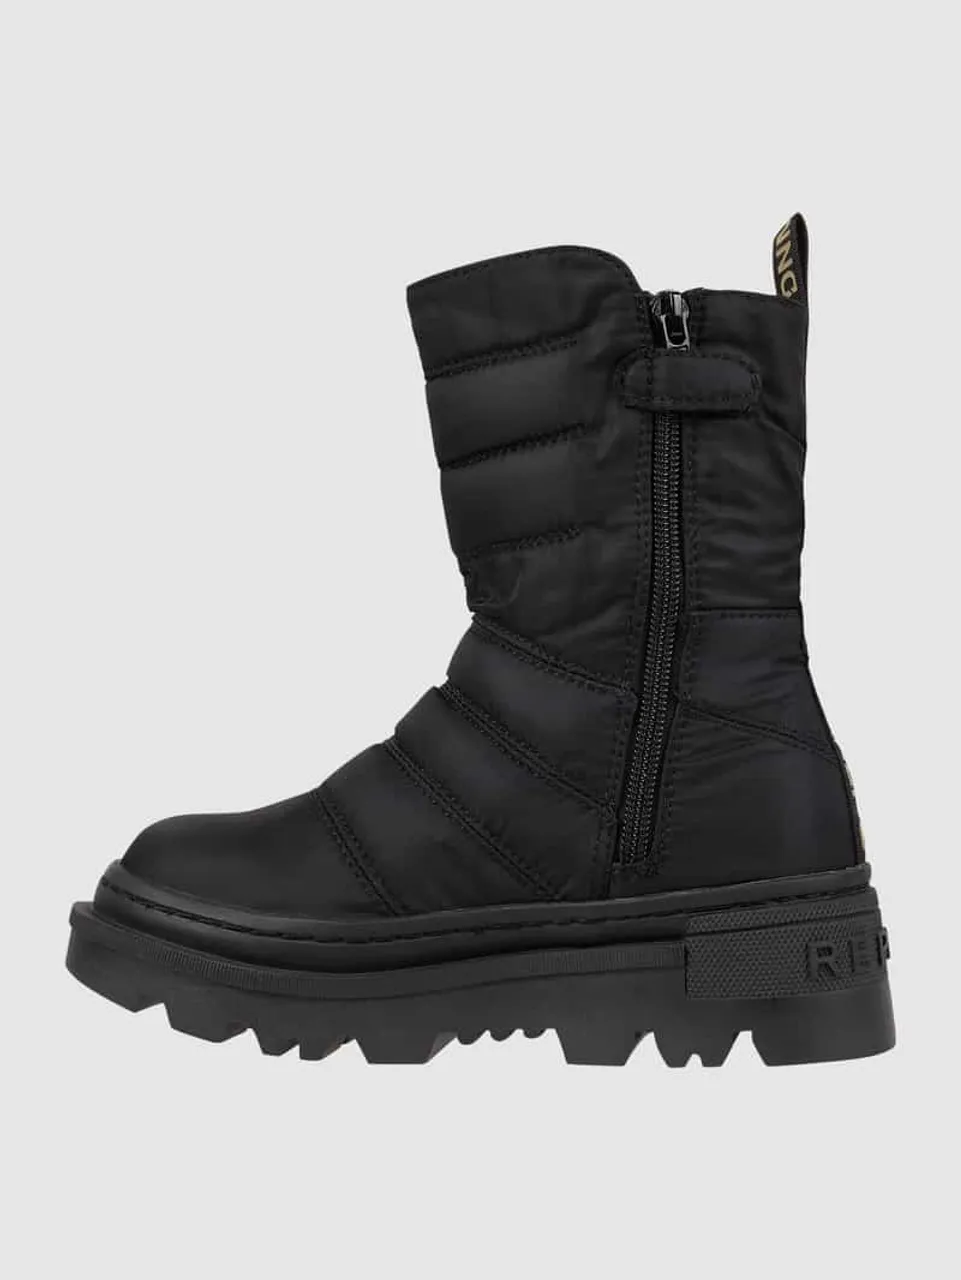 Replay Boots aus Textil Modell 'Laser' in Black